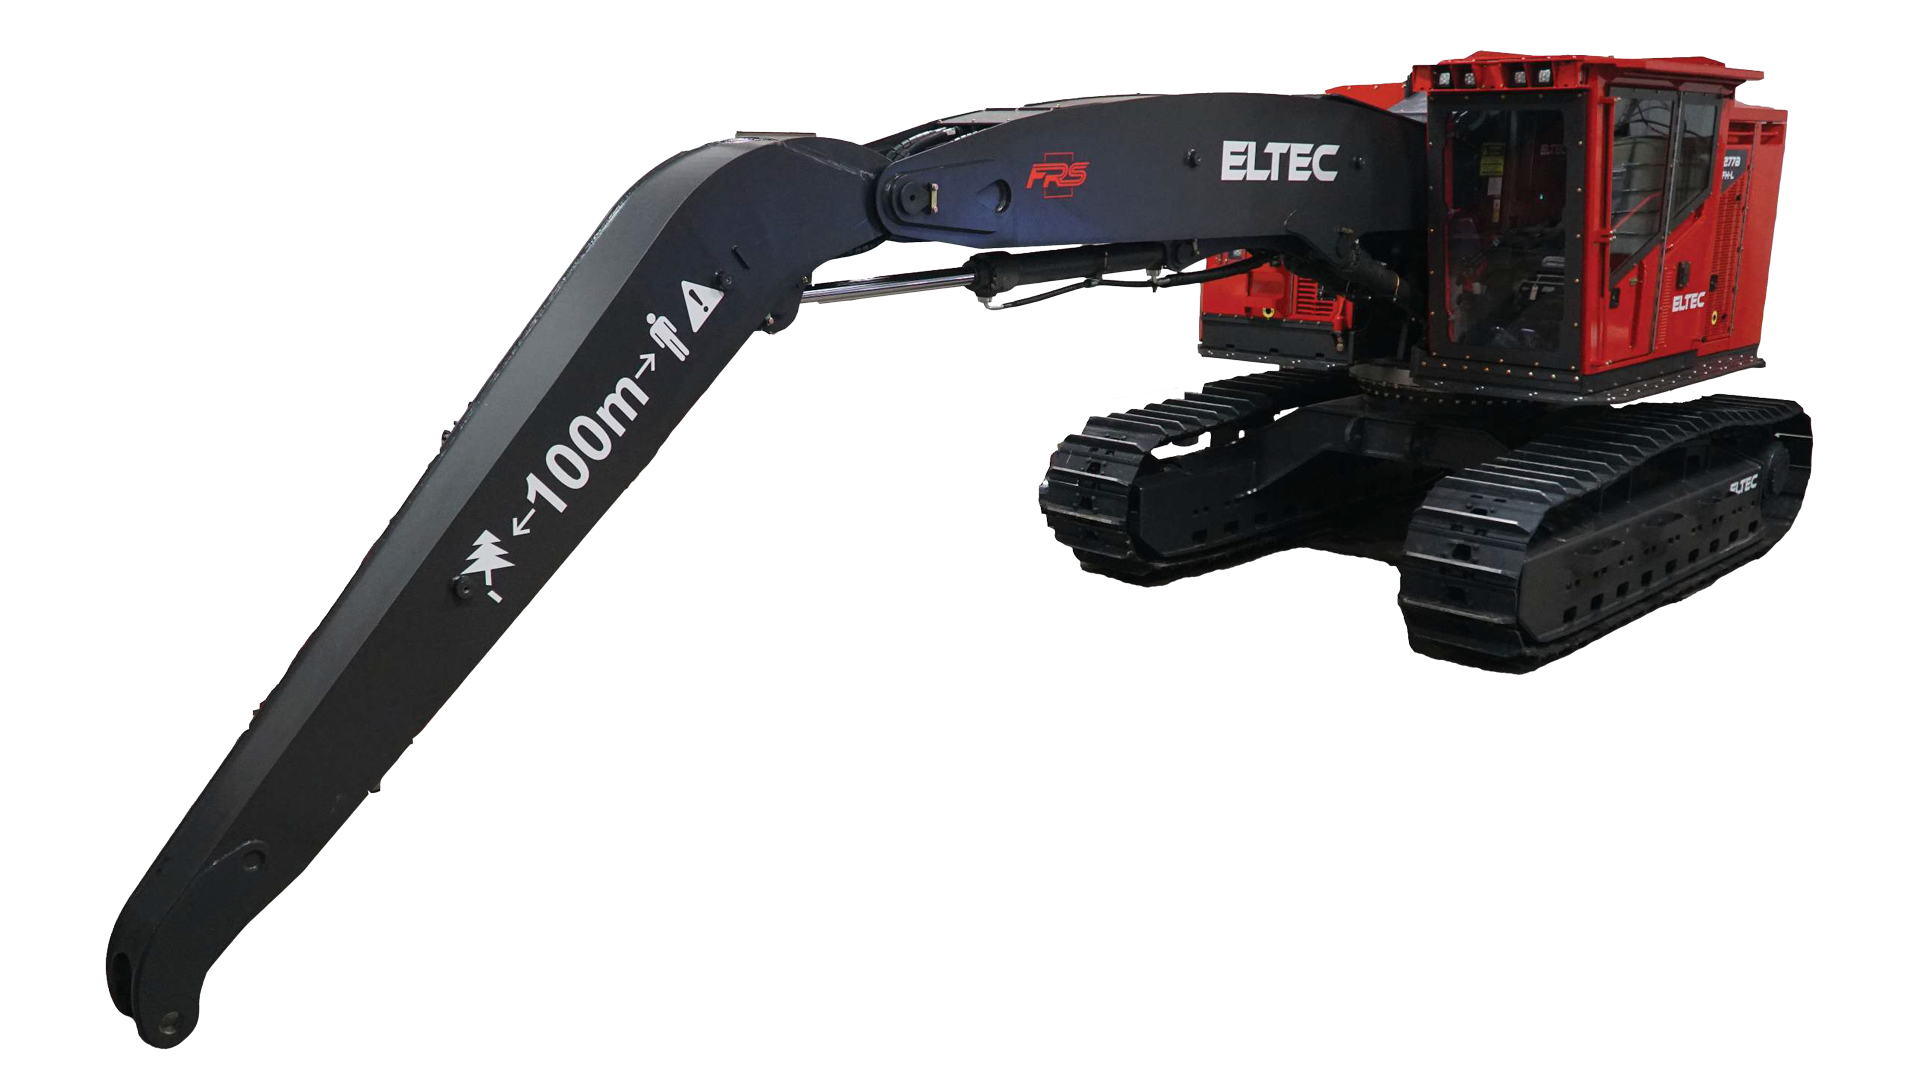 a red and black excavator with a long arm is sitting on a white background .